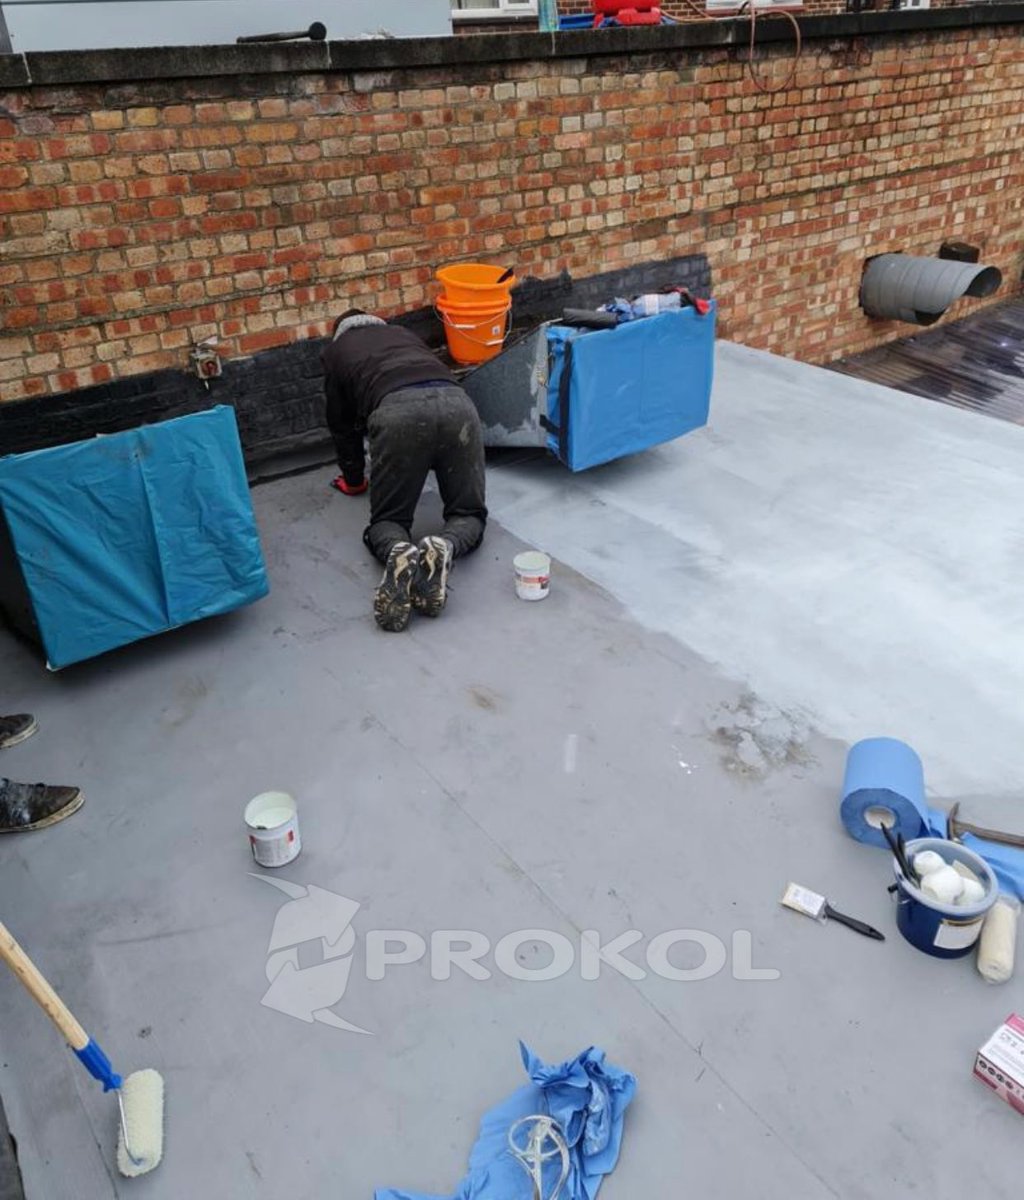 Prokol Polymers UK - Manufacturer of MonoSeal a single layer waterproofing membrane system that cures I one hour, Warrington Fire Certified to Building Regulation & T4 System certification.